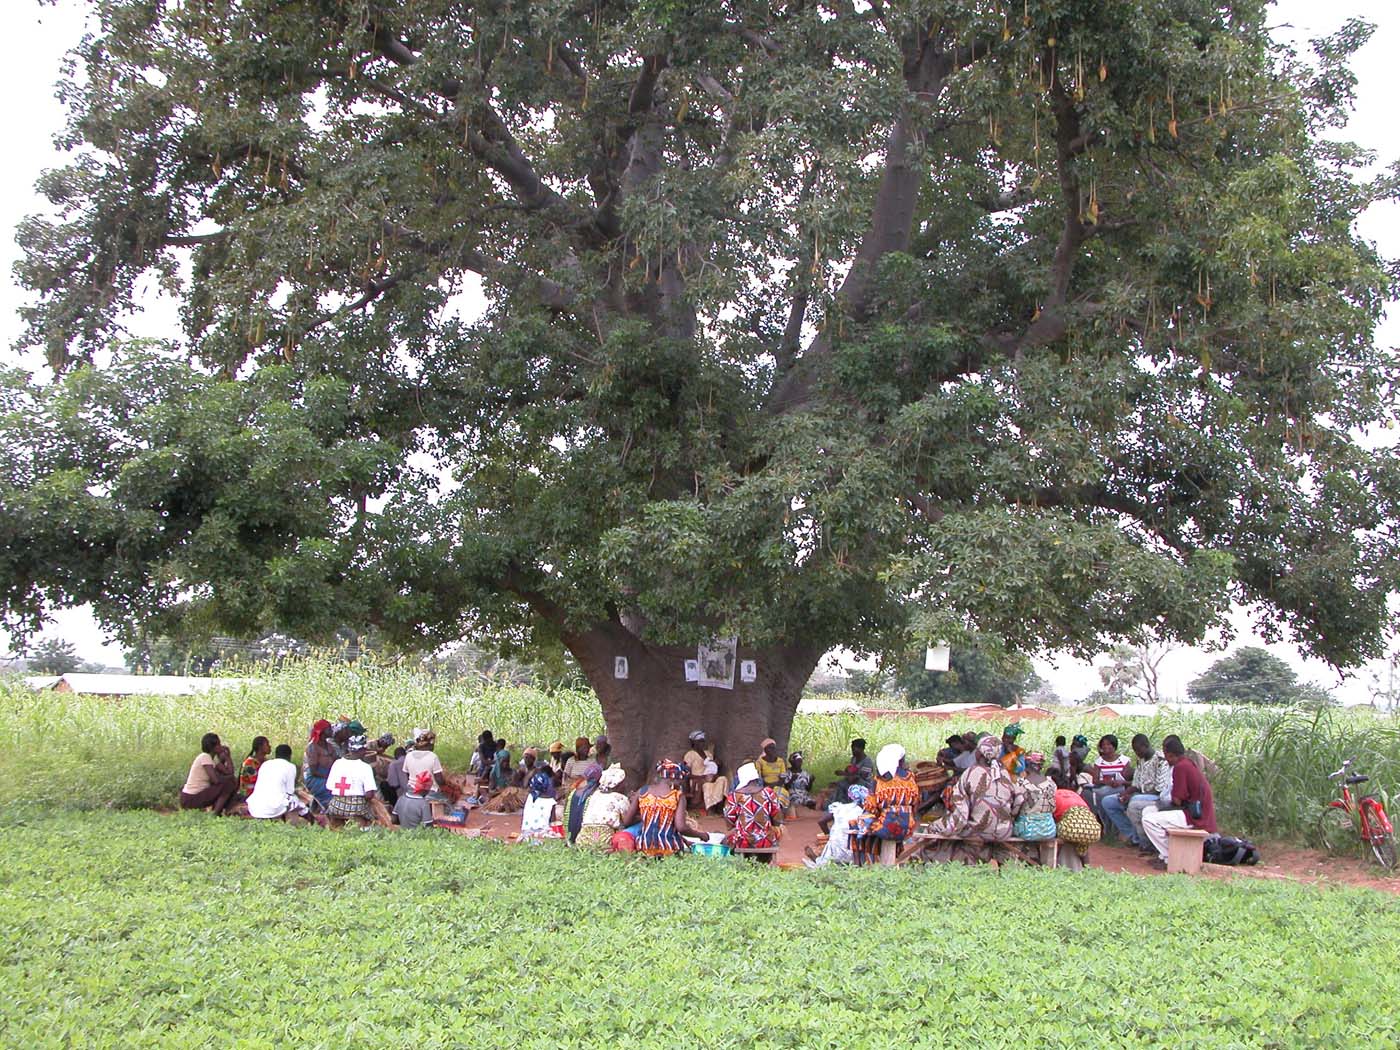 Weaving under the shade of a Baobab tree